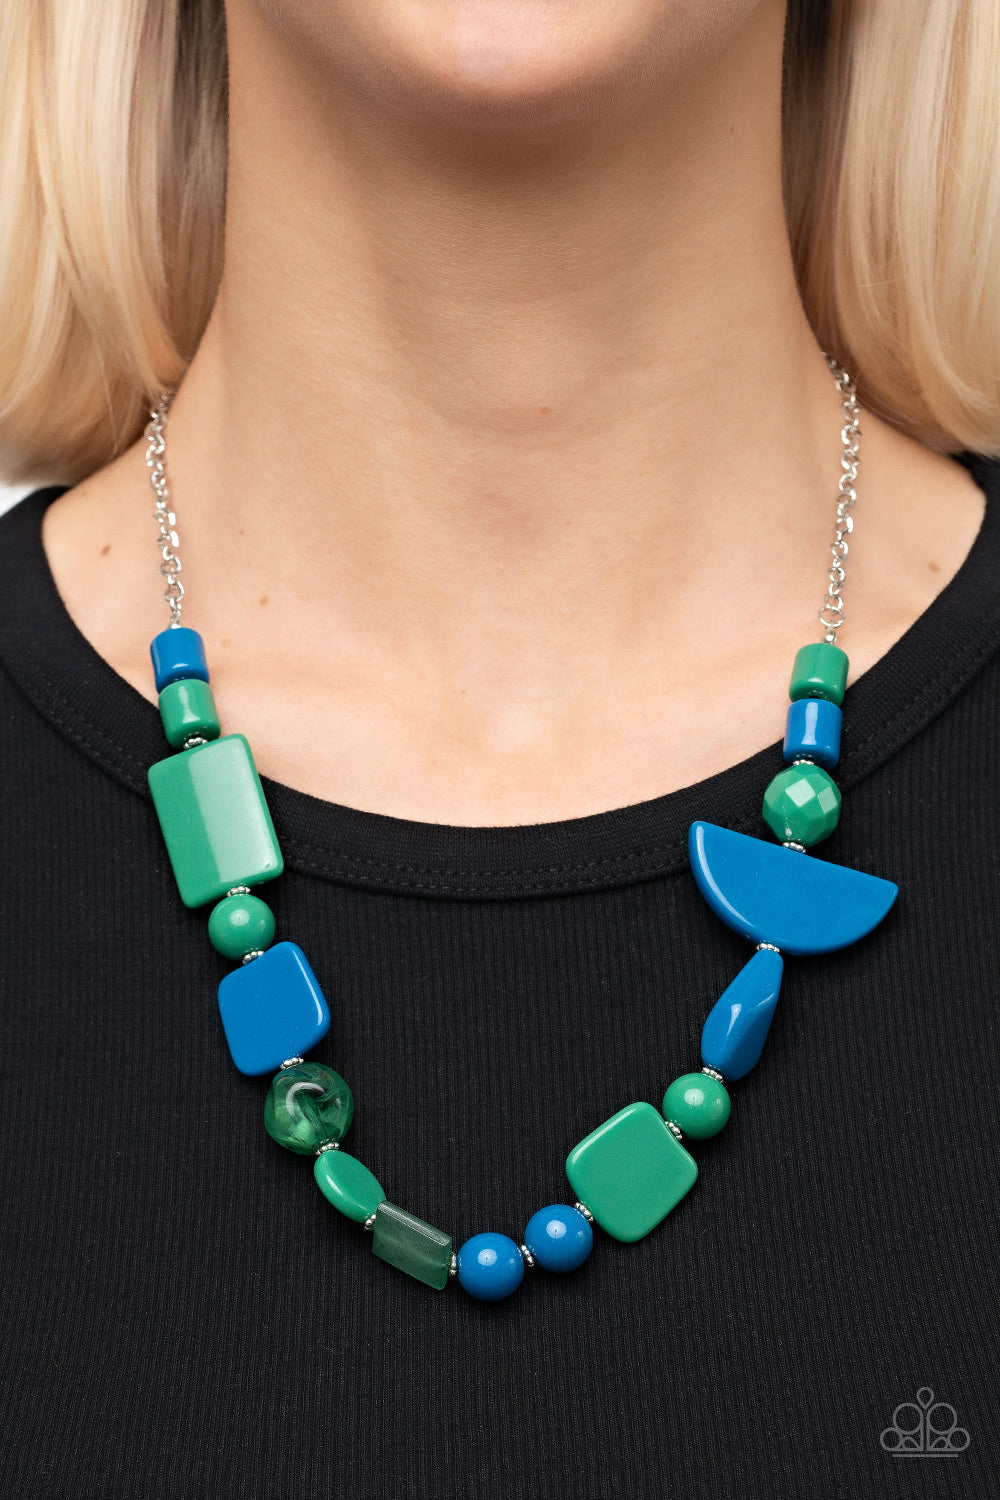 Tranquil Trendsetter - Green & Blue Necklace - Paparazzi Accessories - Paparazzi Accessories 